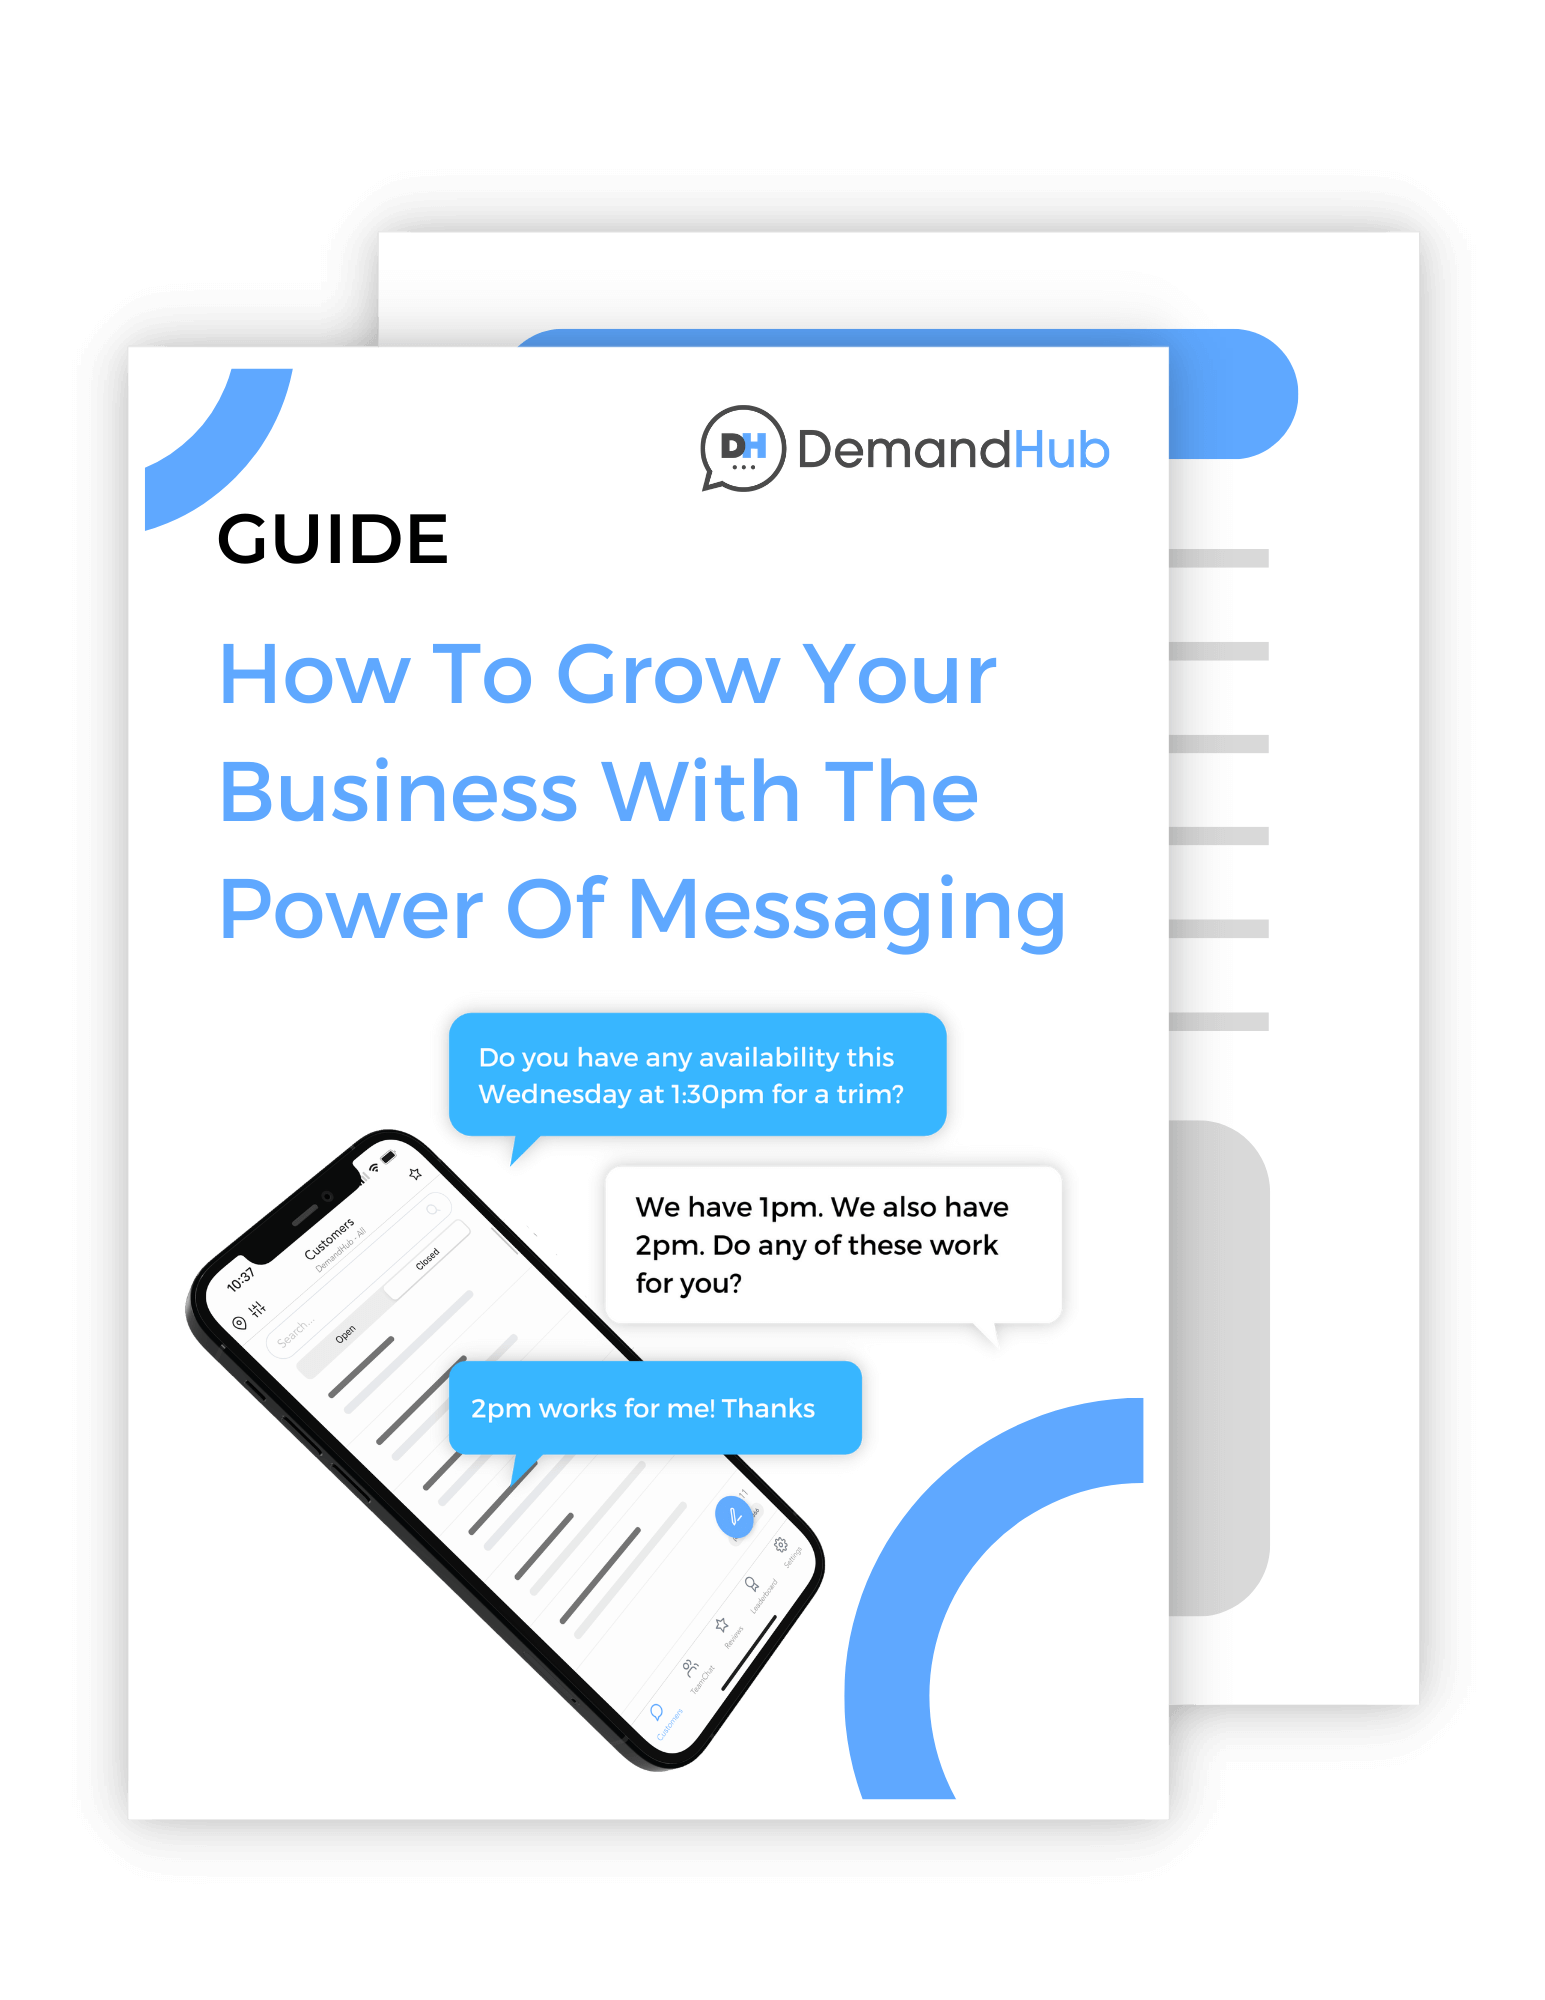 Why Messaging Your Customers Will Help Your Business Grow